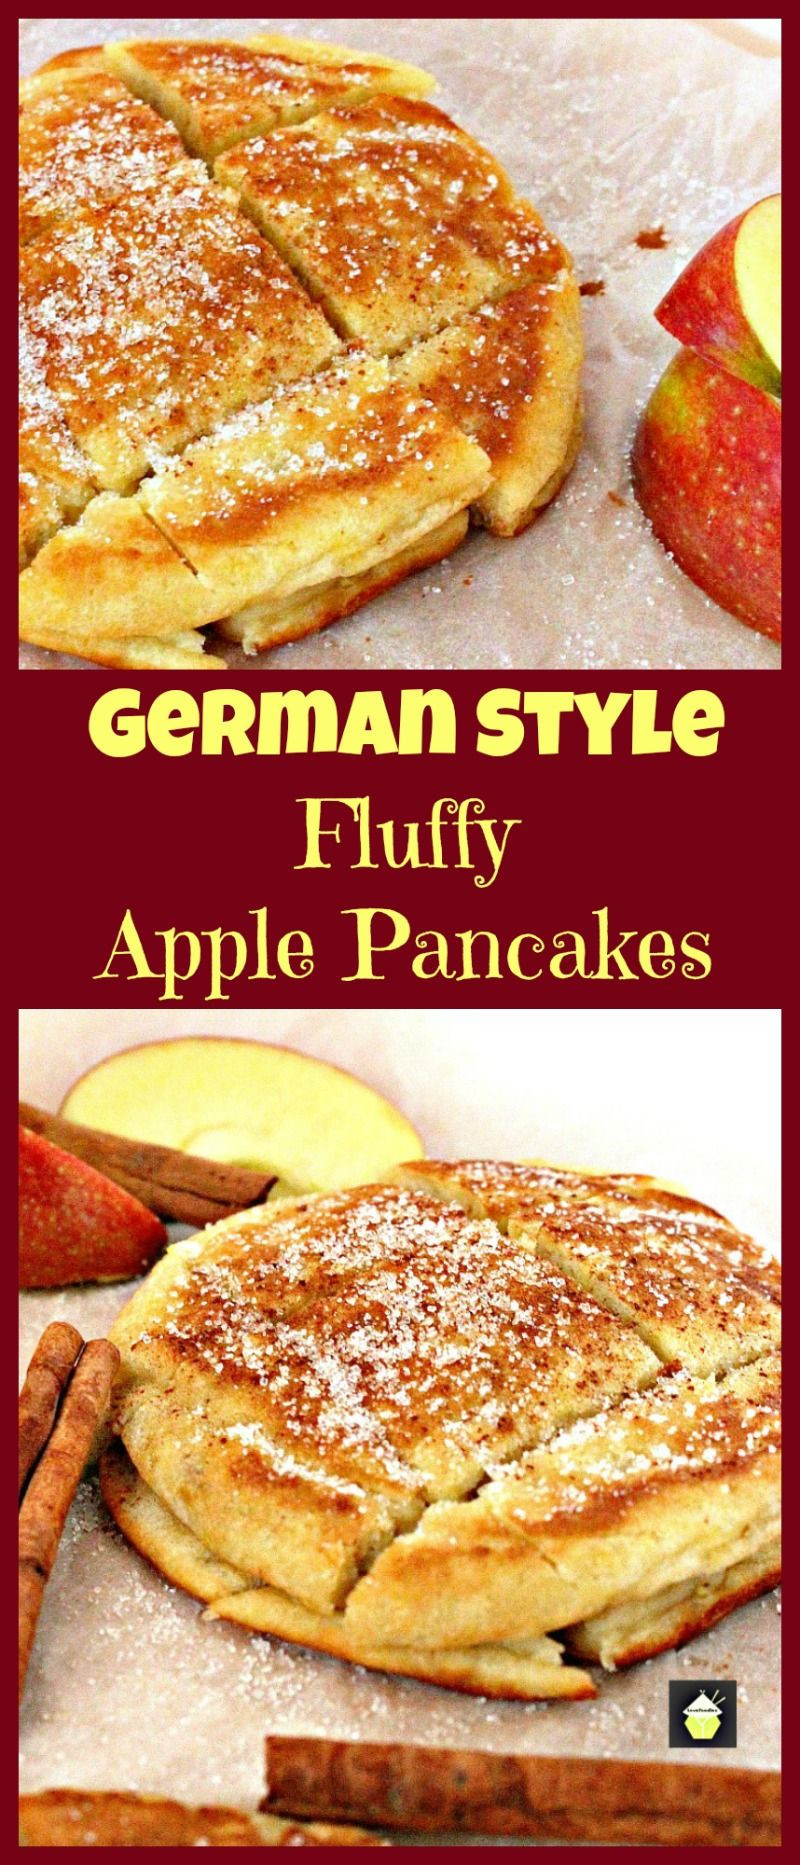 German Breakfast Recipes
 German Style Fluffy Apple Pancakes Delicious quick and